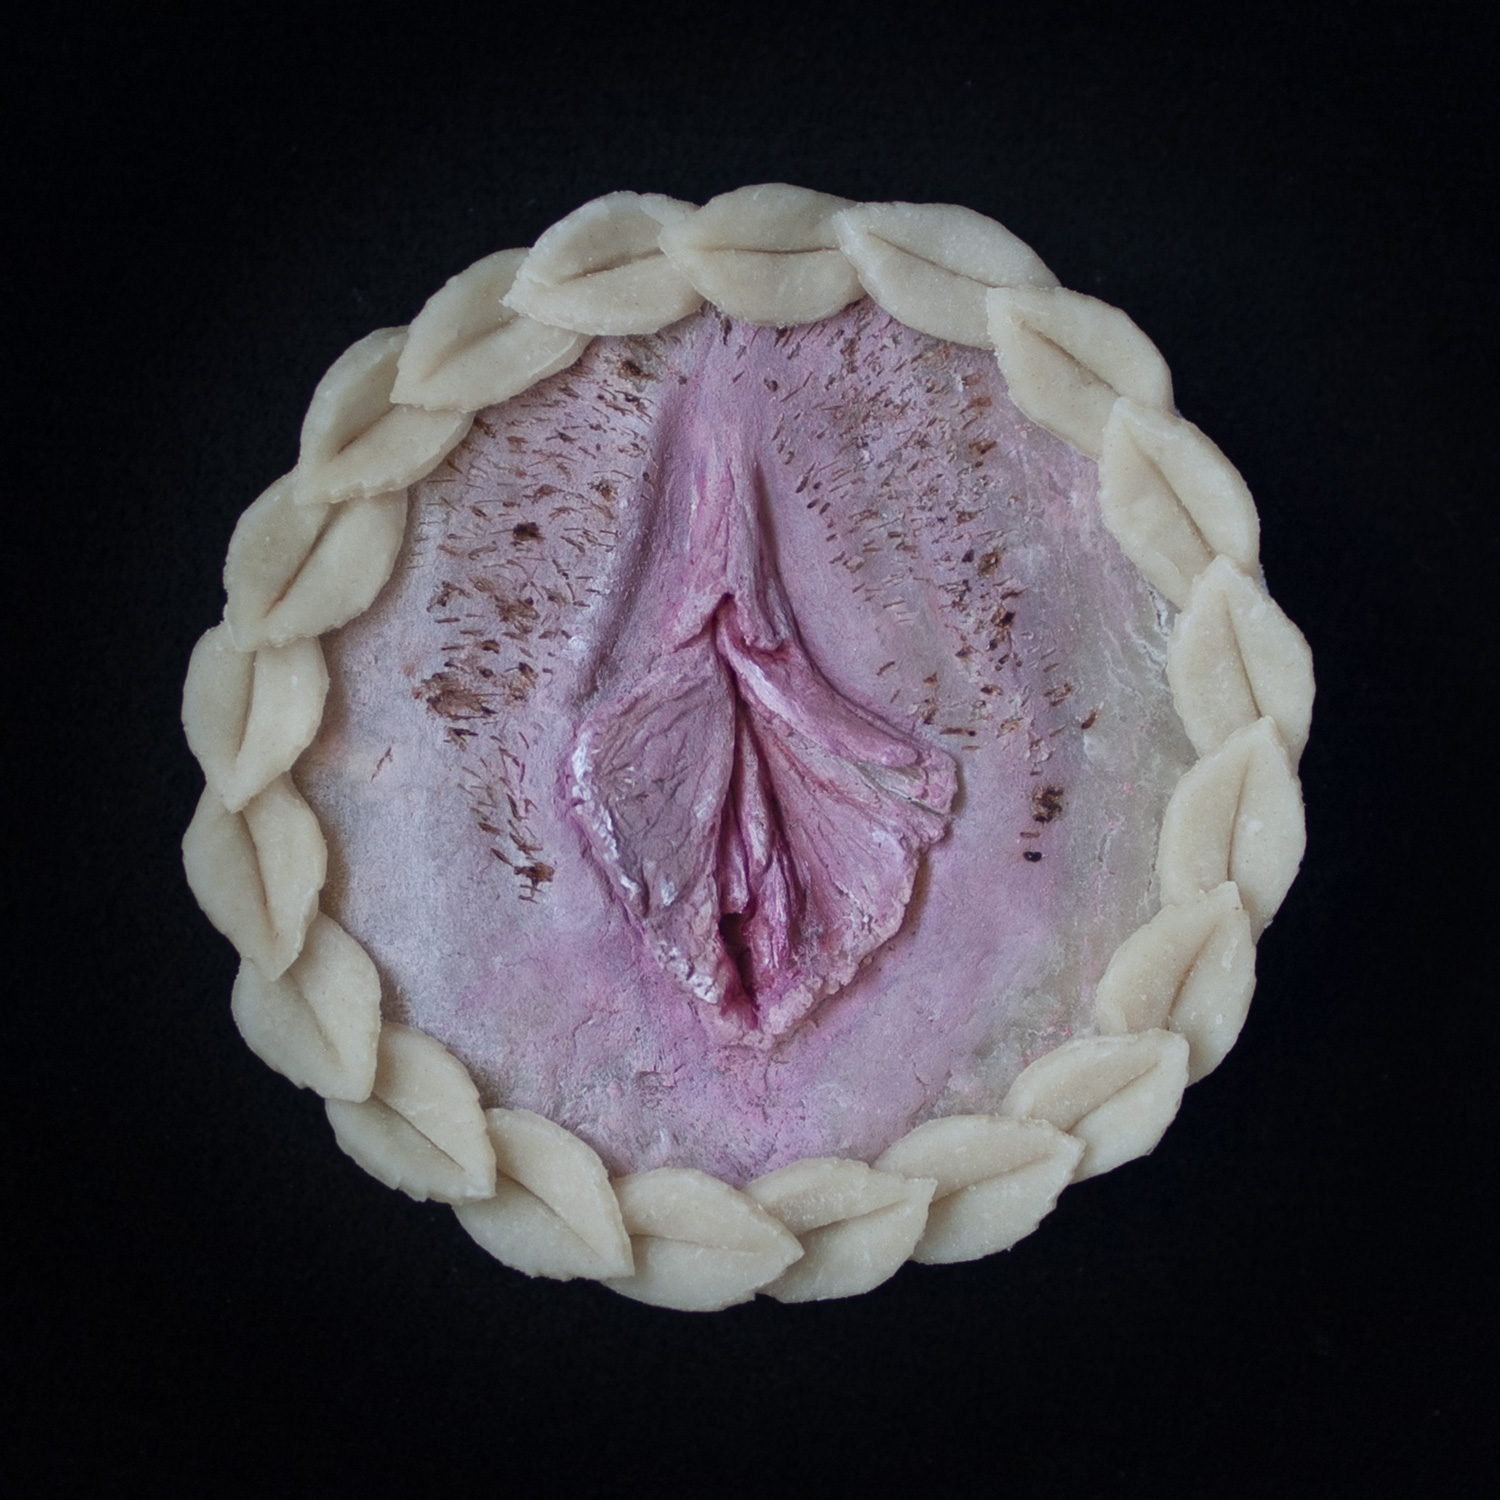 Mini vulva pie on black background with hand sculpted, hand painted vulva art surrounded with pie crust leaves